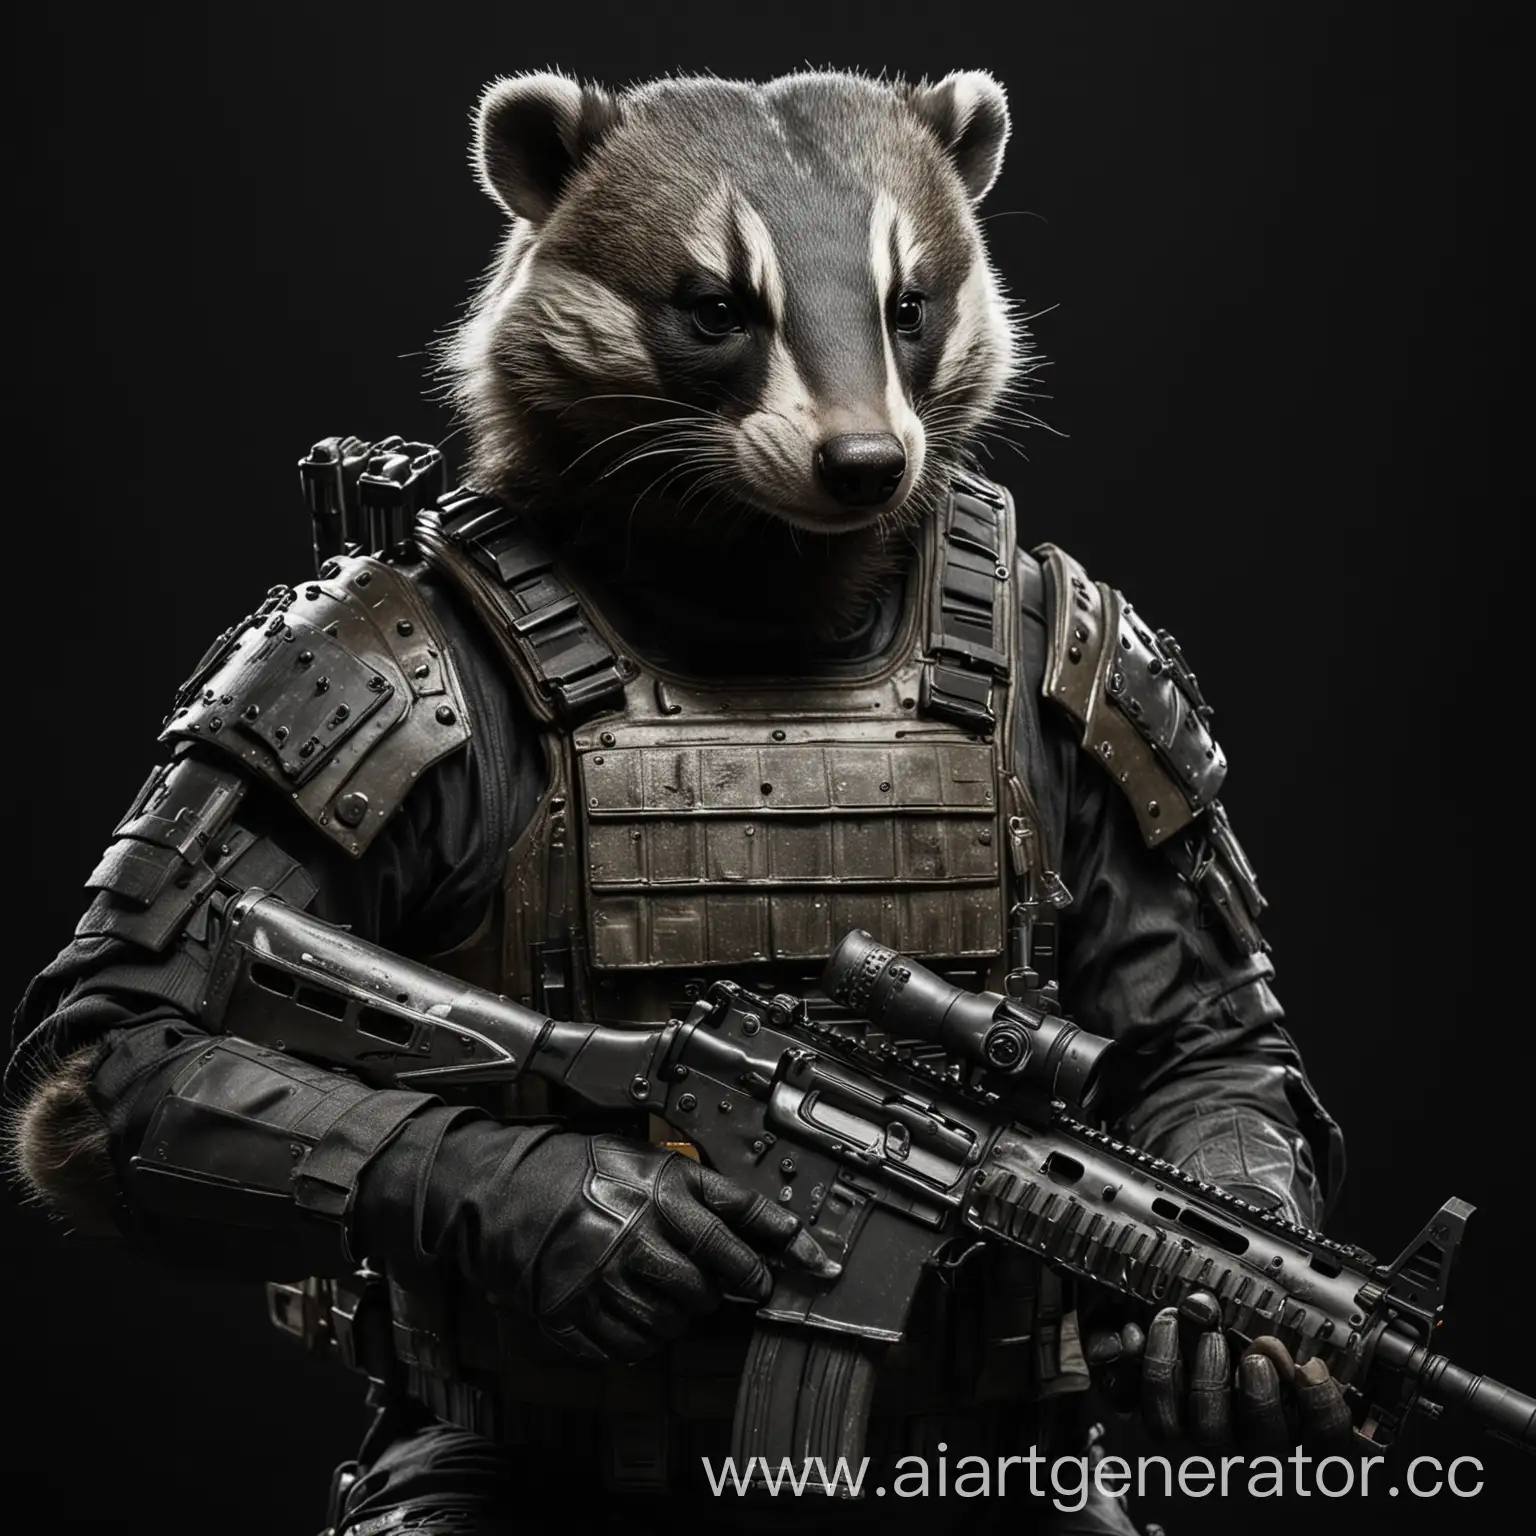 Badger-in-Tactical-Body-Armor-with-Automatic-Weapon-on-Black-Background